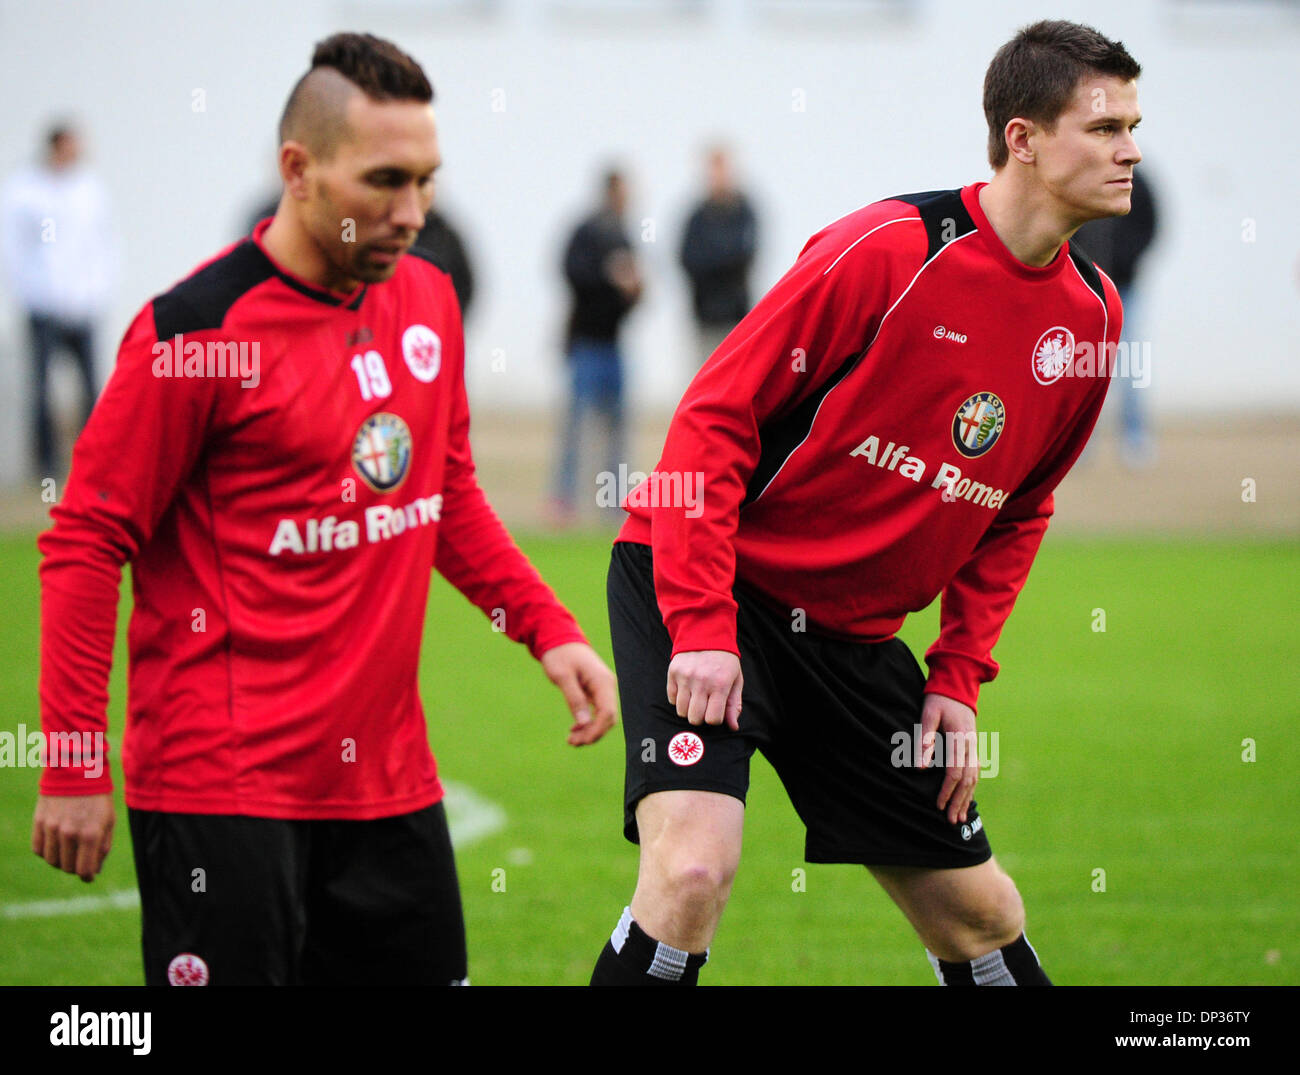 The new players of Eintracht Frankfurt, Tobias Weis and Alexander Madlung, stand on the field during the first training of the team for the next Bundesliga season. Photo: Daniel Reinhardt/dpa Stock Photo